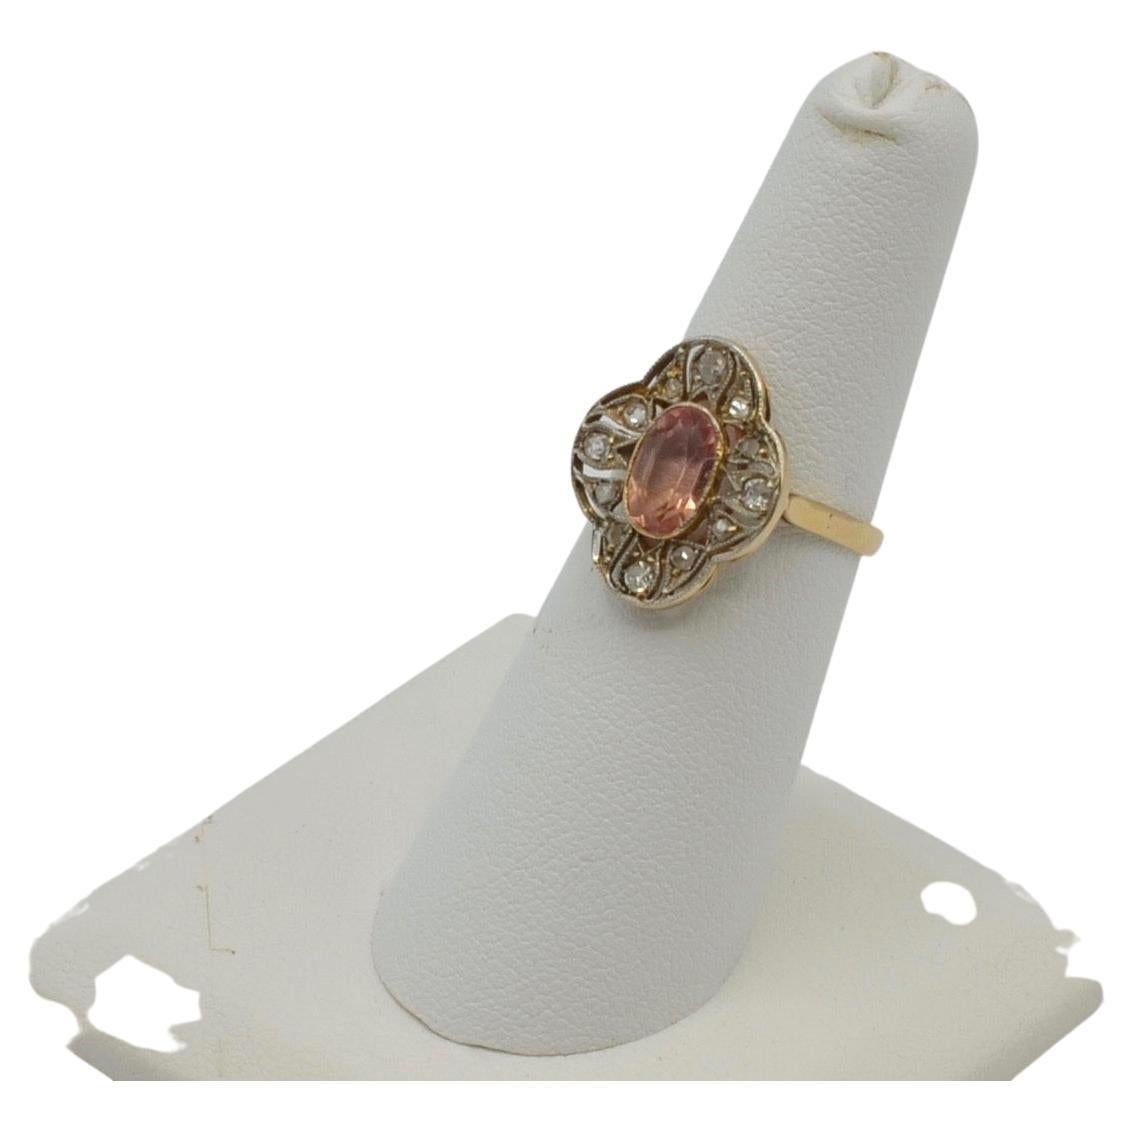 This stunning French 'Turn of the Century' Ring is a beautiful light peach pink Padparadschah Sapphire surrounded by Platinum filigree set diamonds. The carat wight of the diamonds is approximately 0.30 carats. The ring is a size 6 and can be sized